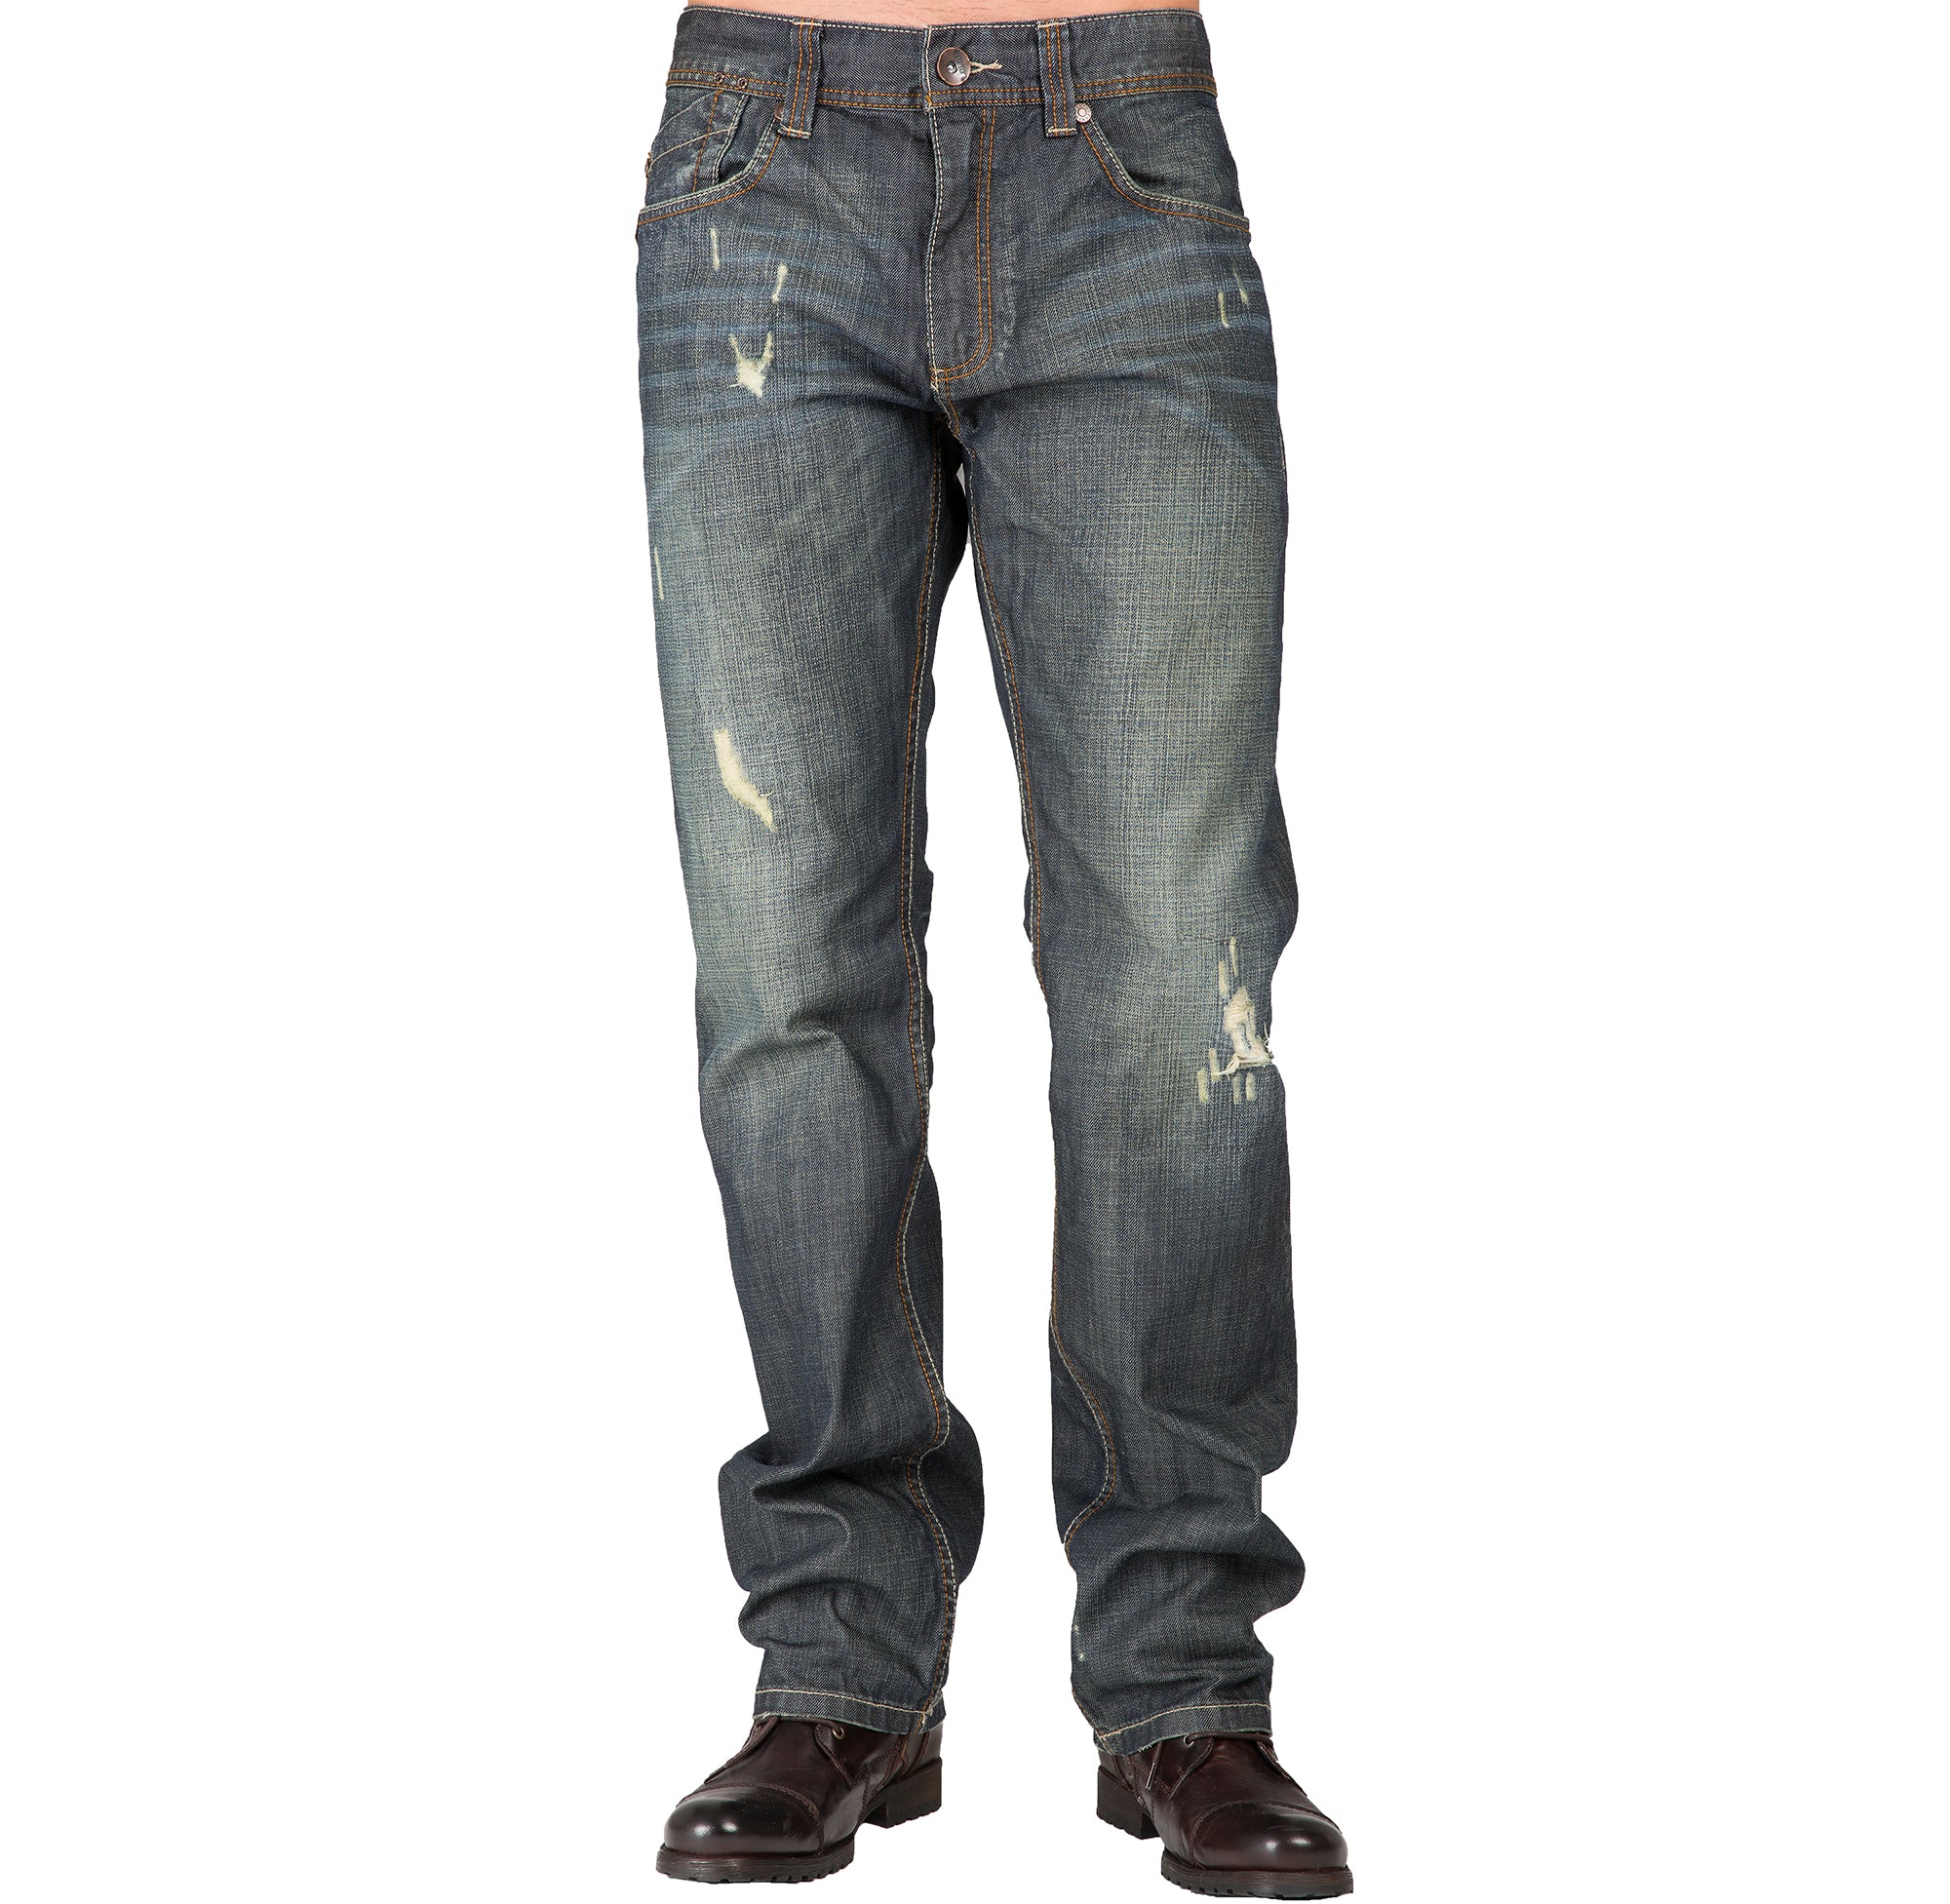 Relaxed Straight Vintage Premium Denim Distressed Signature 5 Pocket Jeans Whiskering